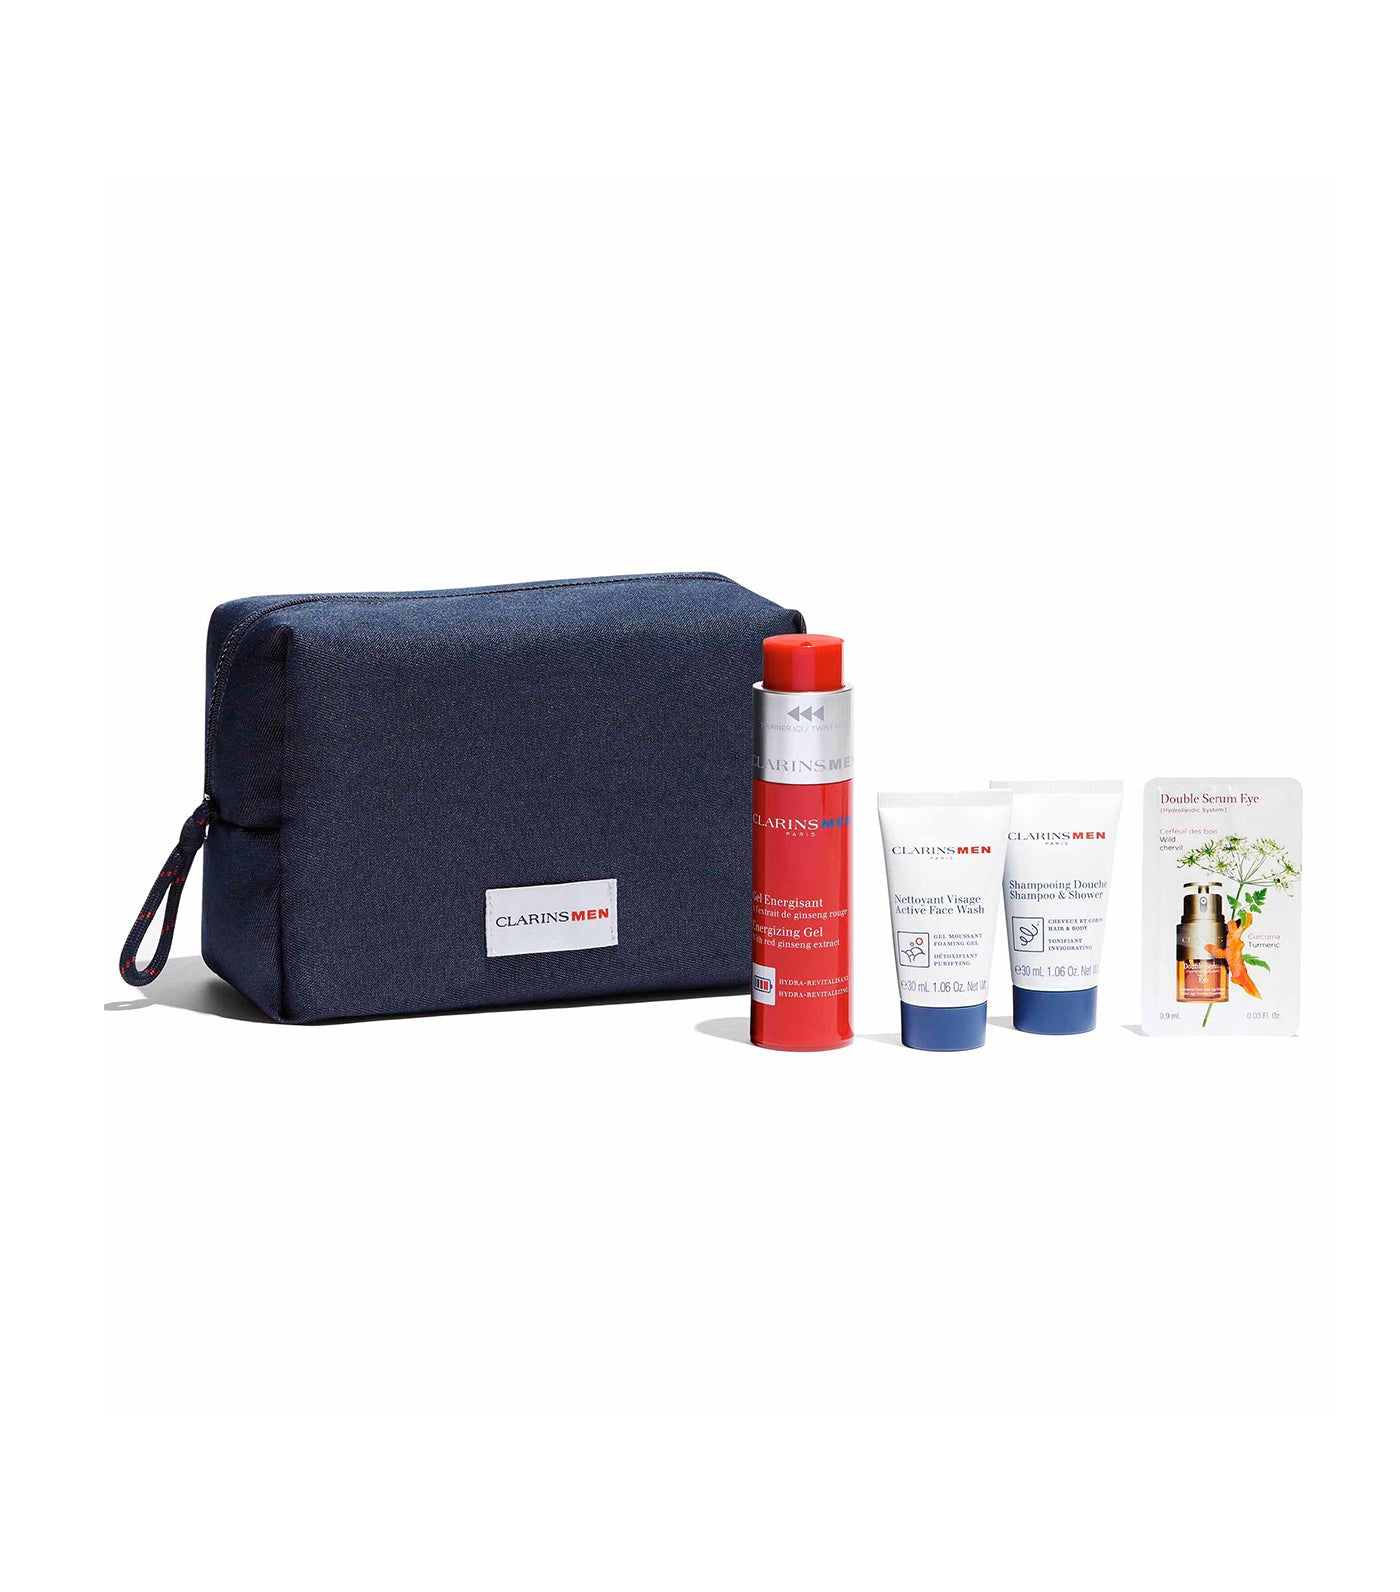 Clarins Men Energizing Collection